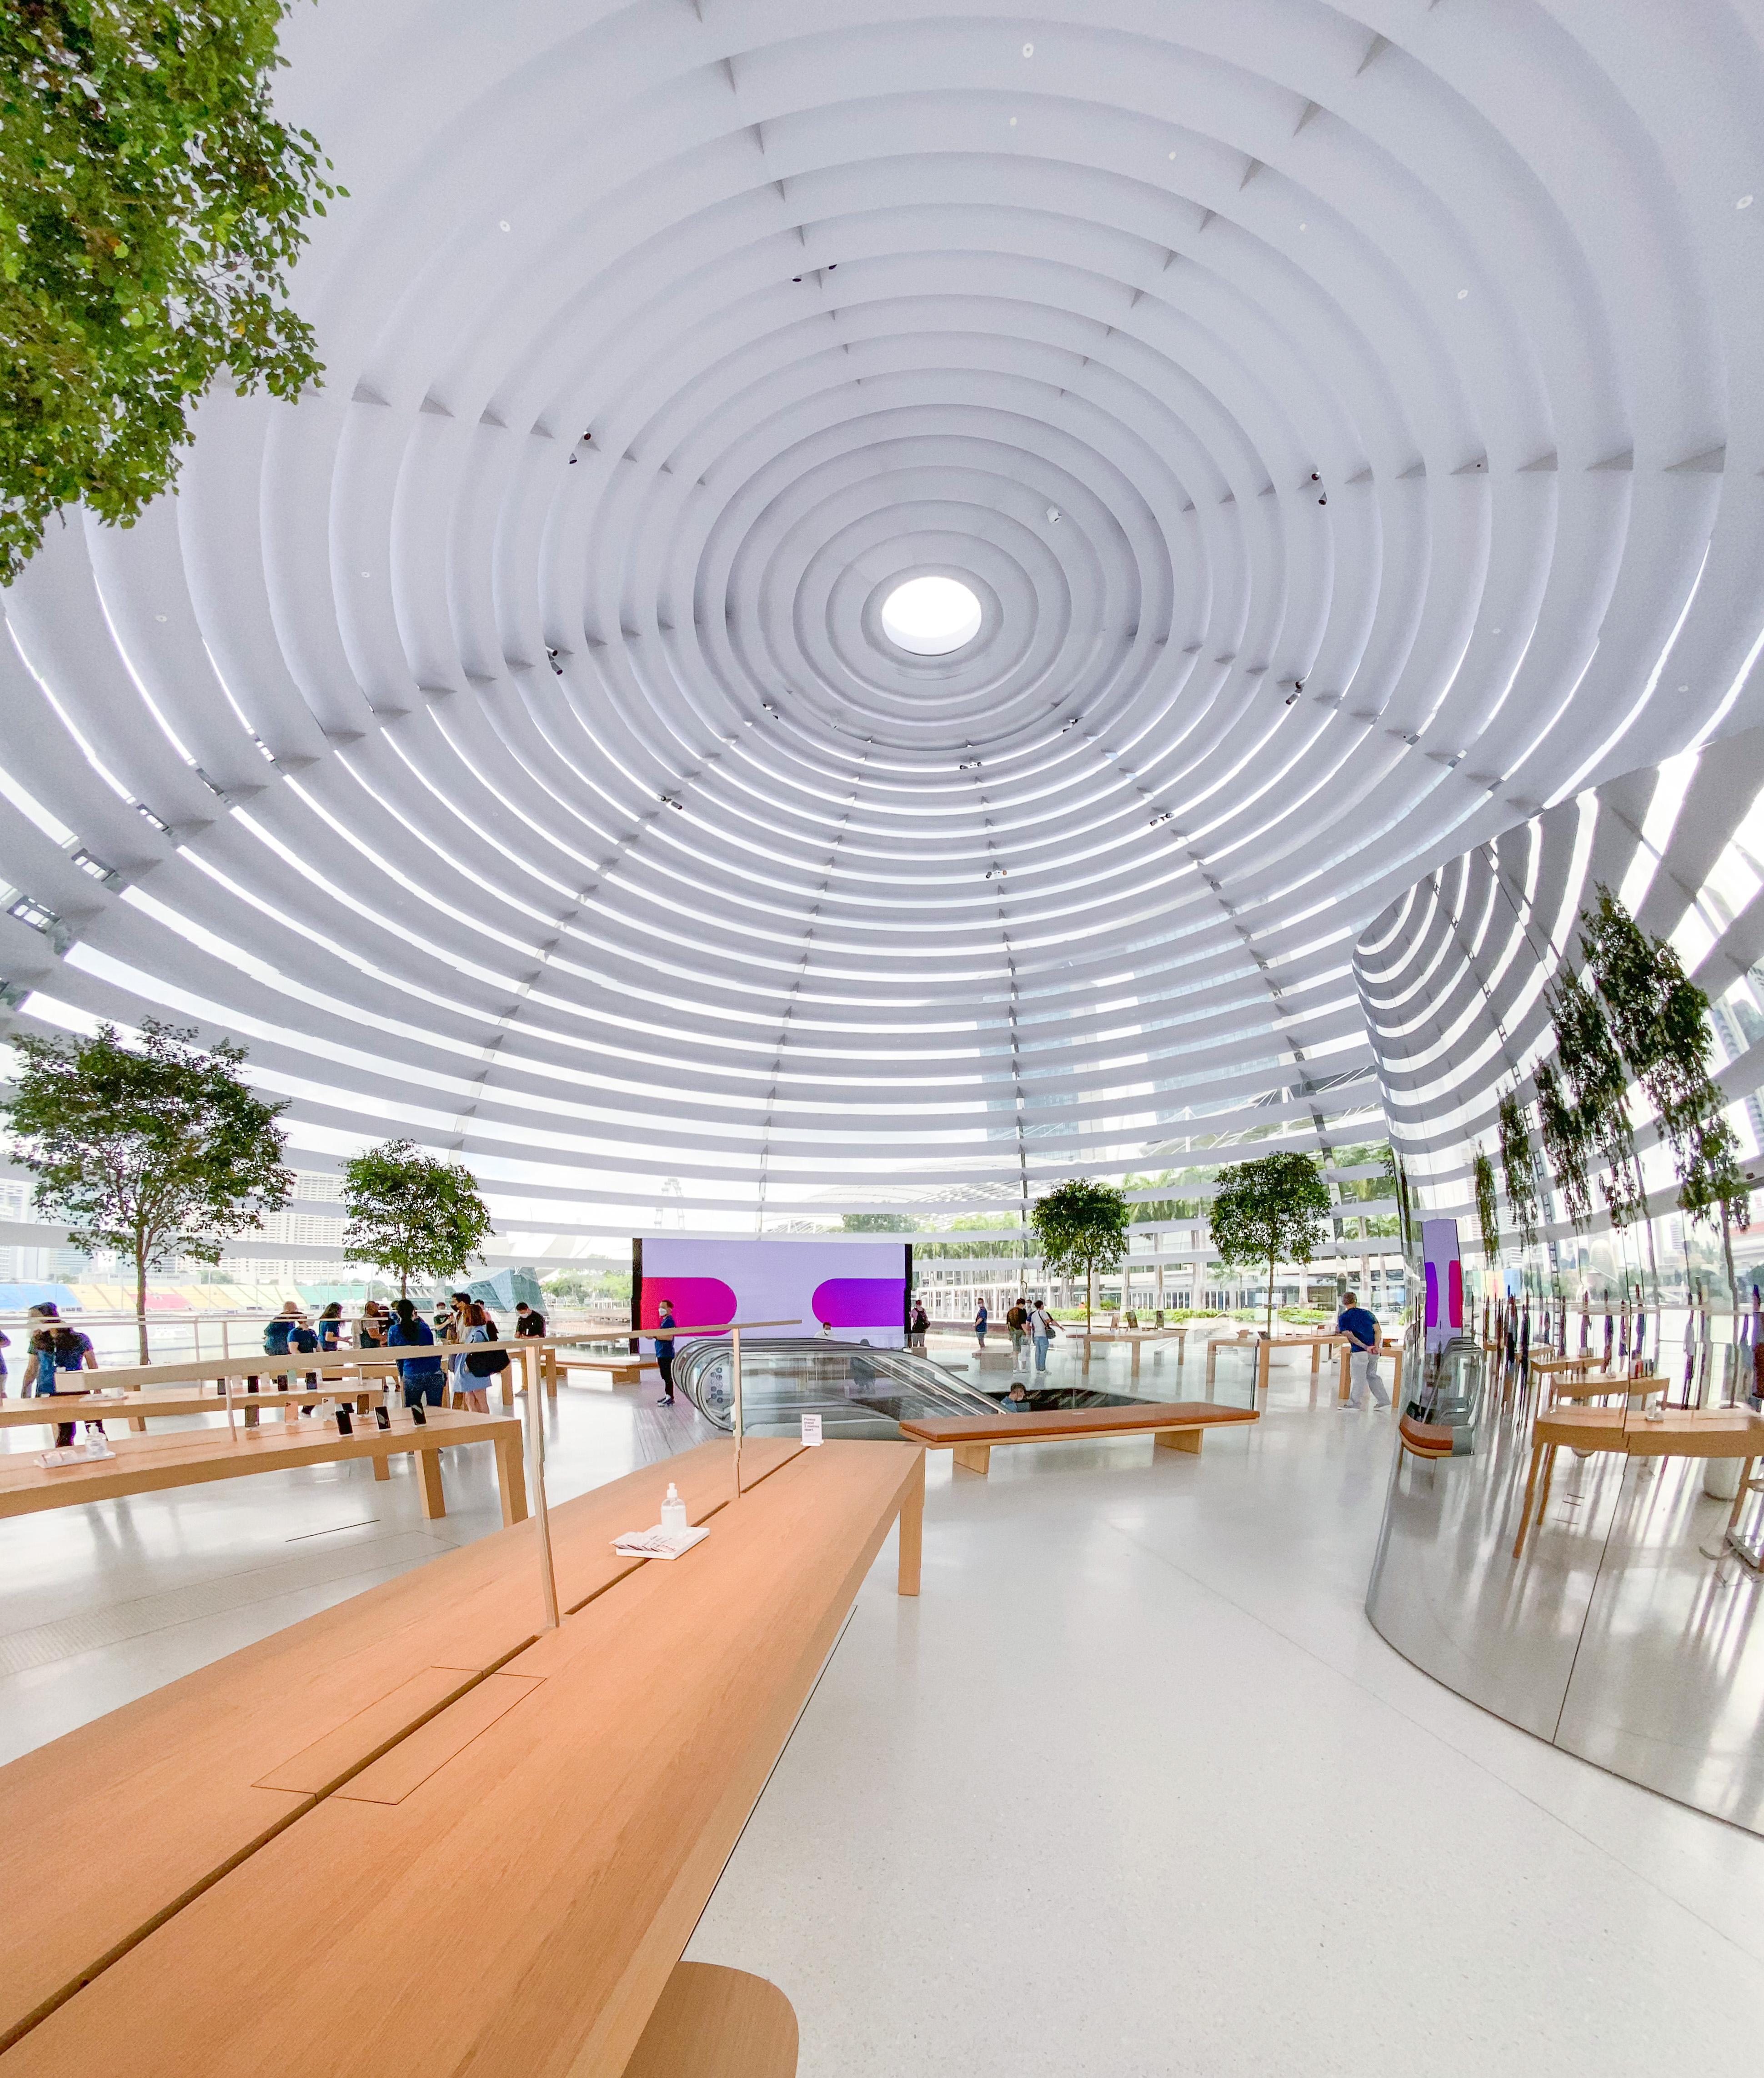 Photos: Apple Marina Bay Sands opens in Singapore - 9to5Mac